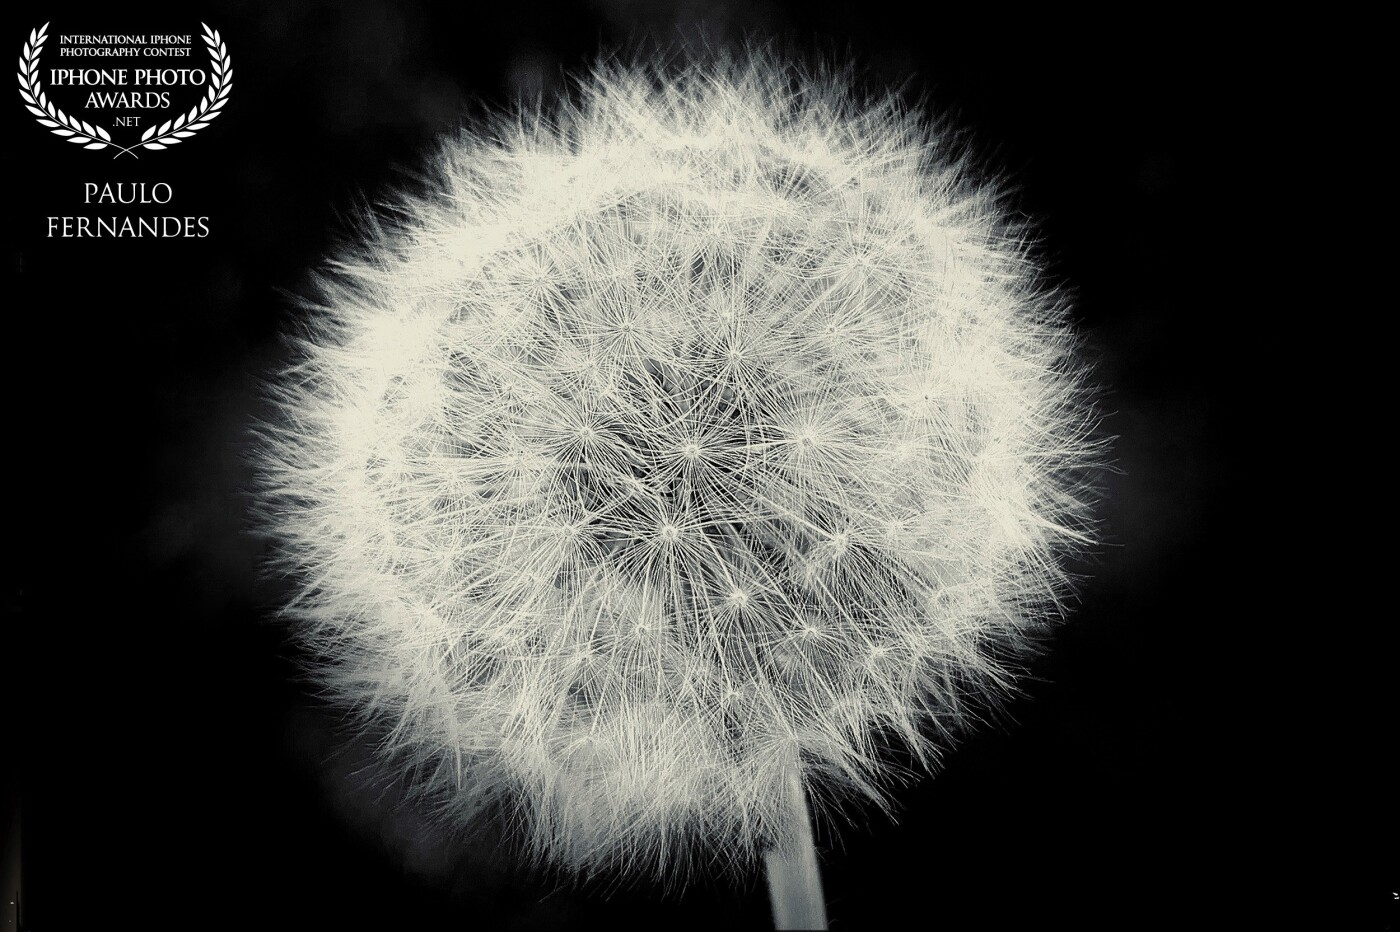 To put my focus into the details of a dandelion I decided to take a black and white capture to express the fragility. After the post-processing, I realized it looks like a planet. So I named this photography "planet dandelion".